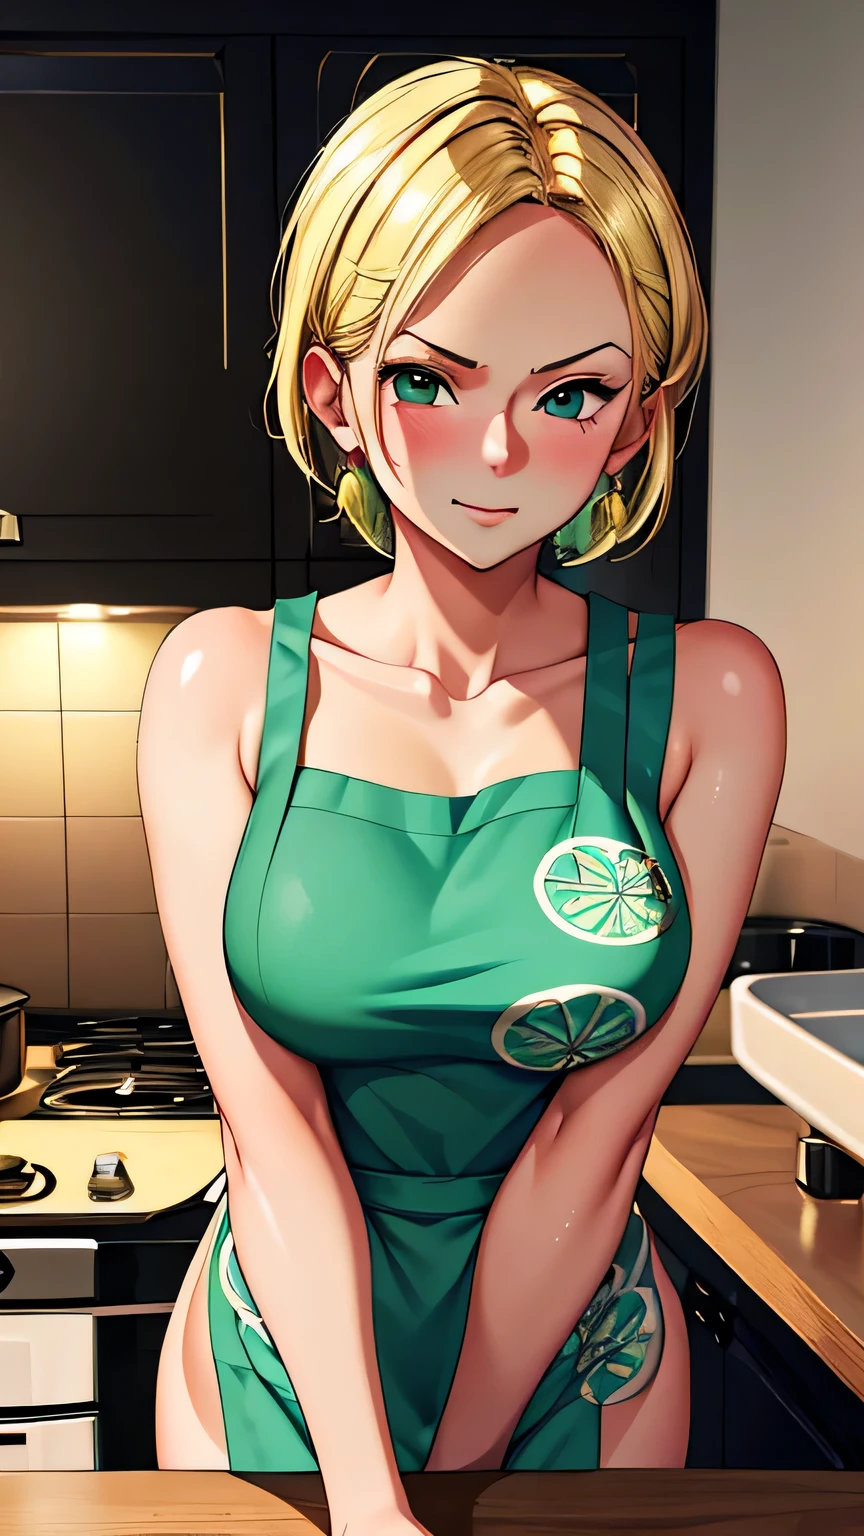 Anime Girl In Green Dress Standing In Kitchen With Stove And Oven SeaArt AI